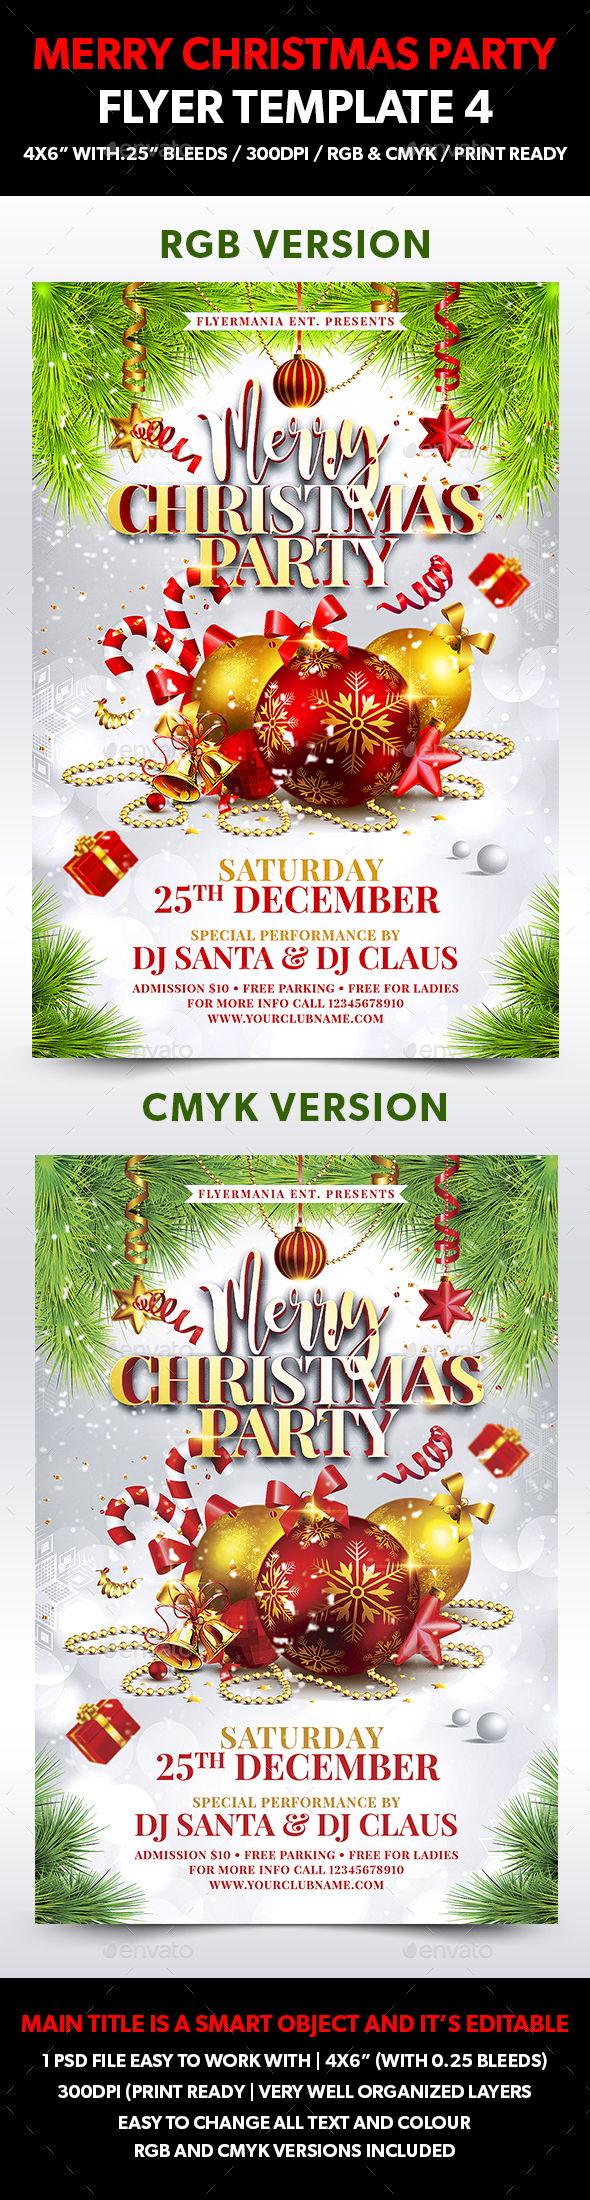 Merry Christmas Party Flyer Template 4